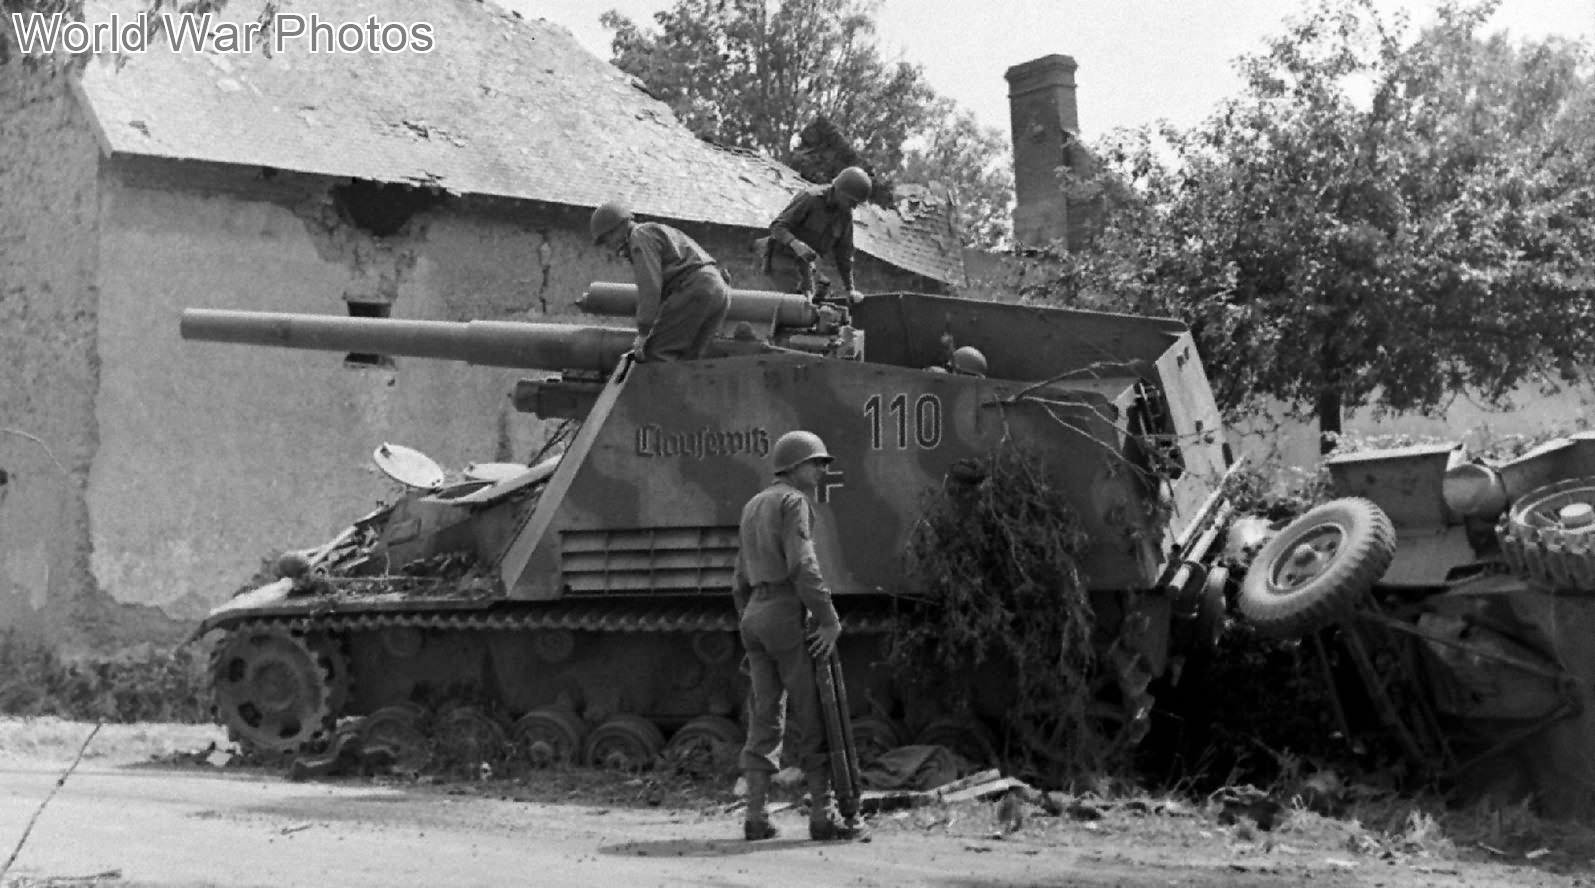 Hummel „110” named Clausewitz Normandy, Summer 1944